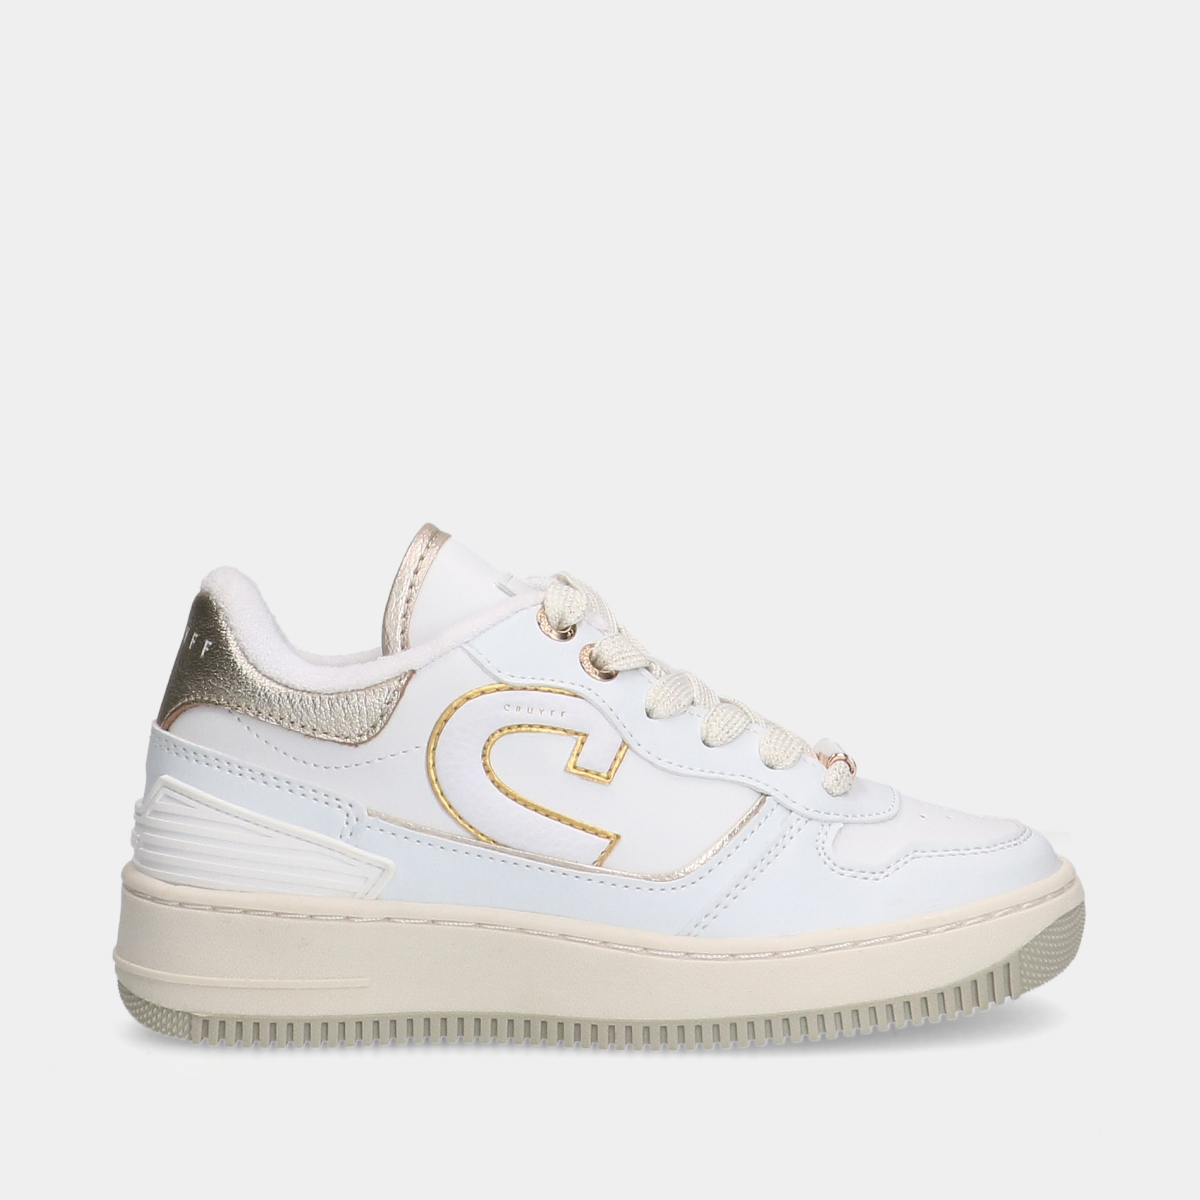 Cruyff campo low white gold kinder sneakers